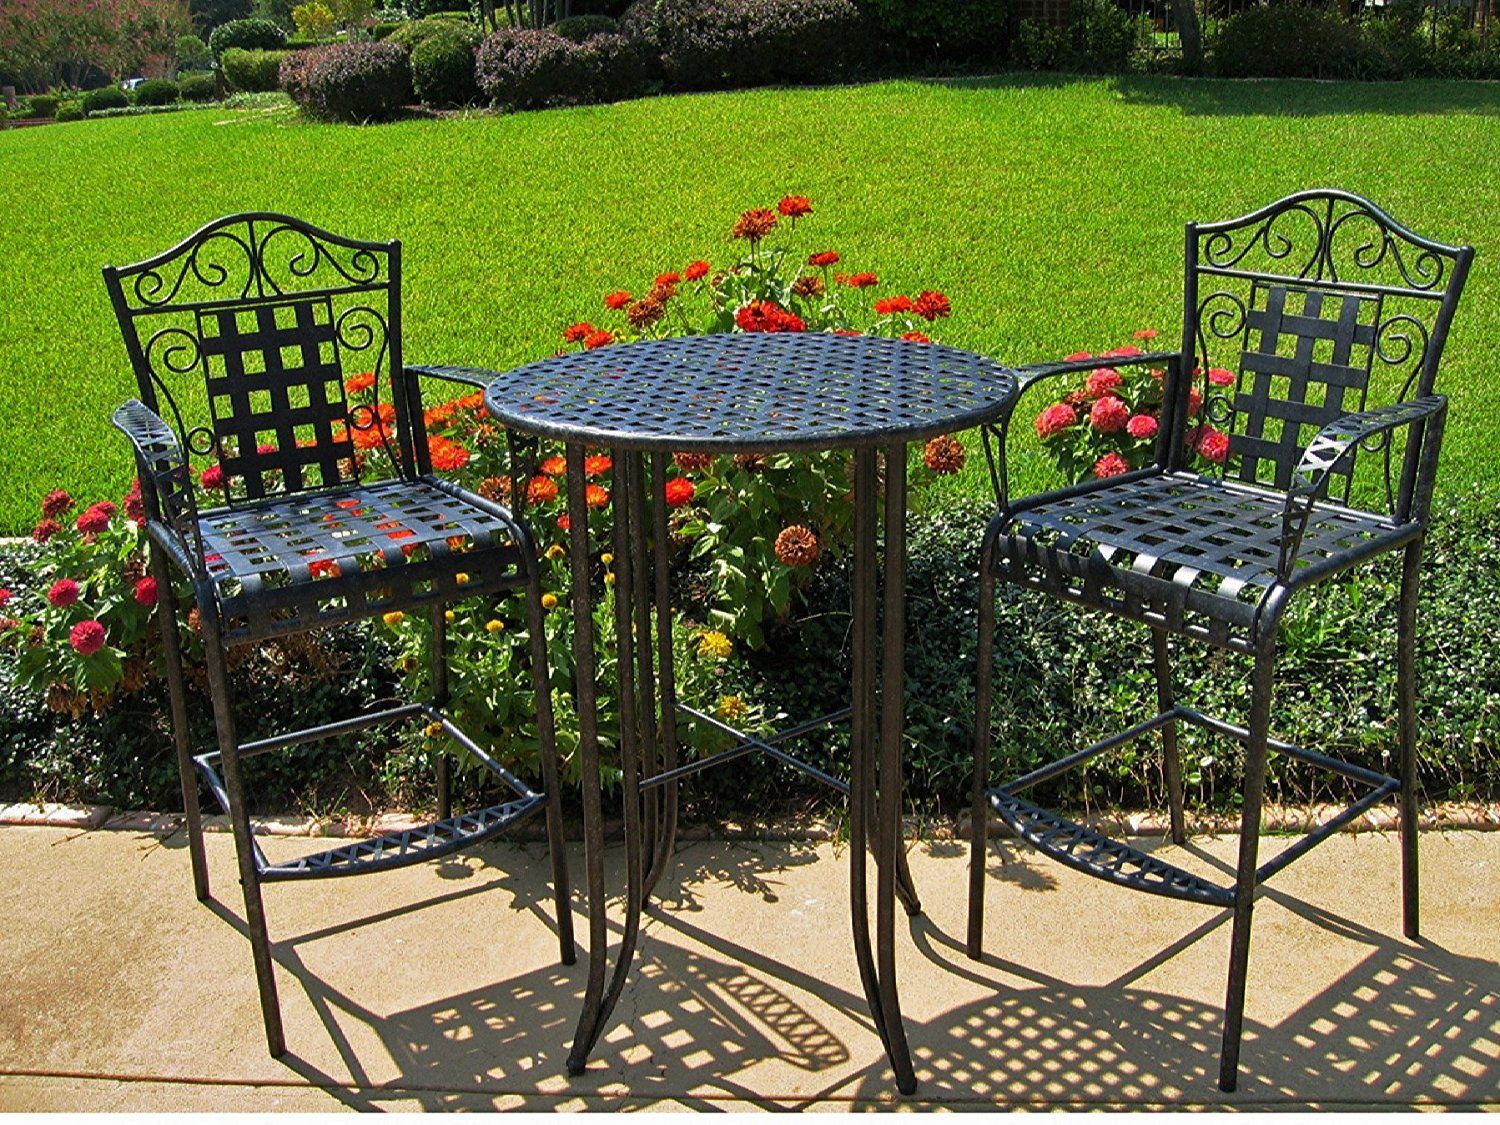 3 Piece Bar Height Patio Bistro Sets For The Outdoors – Reviews Regarding 3 Piece Patio Bistro Sets (View 8 of 15)